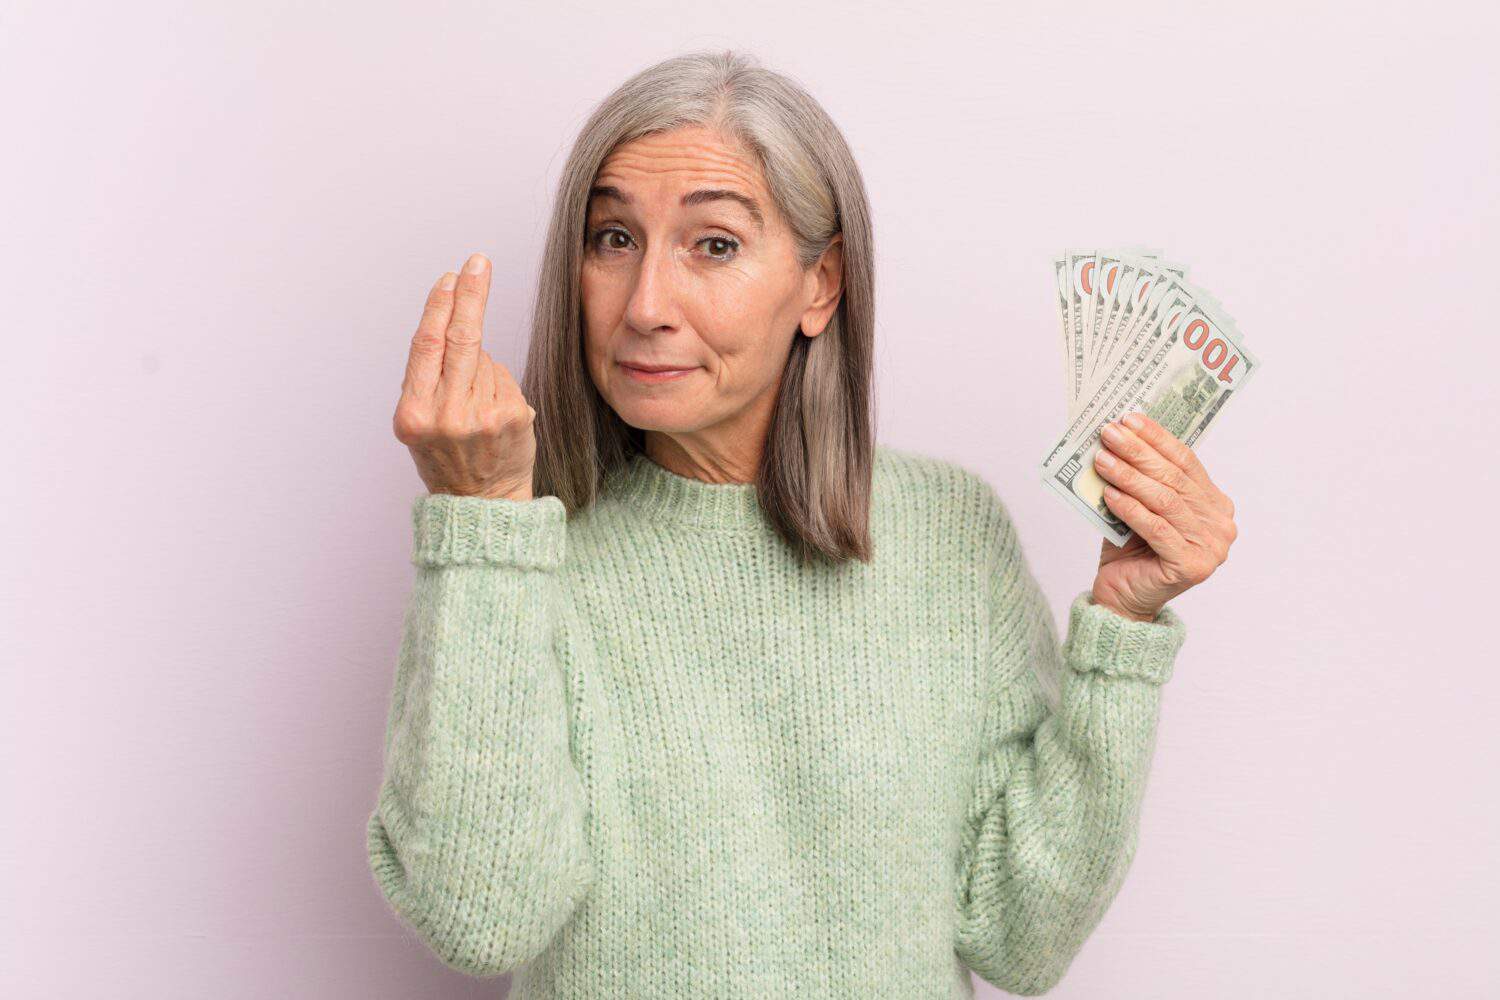 middle age woman making capice or money gesture, telling you to pay. dollar banknotes concept